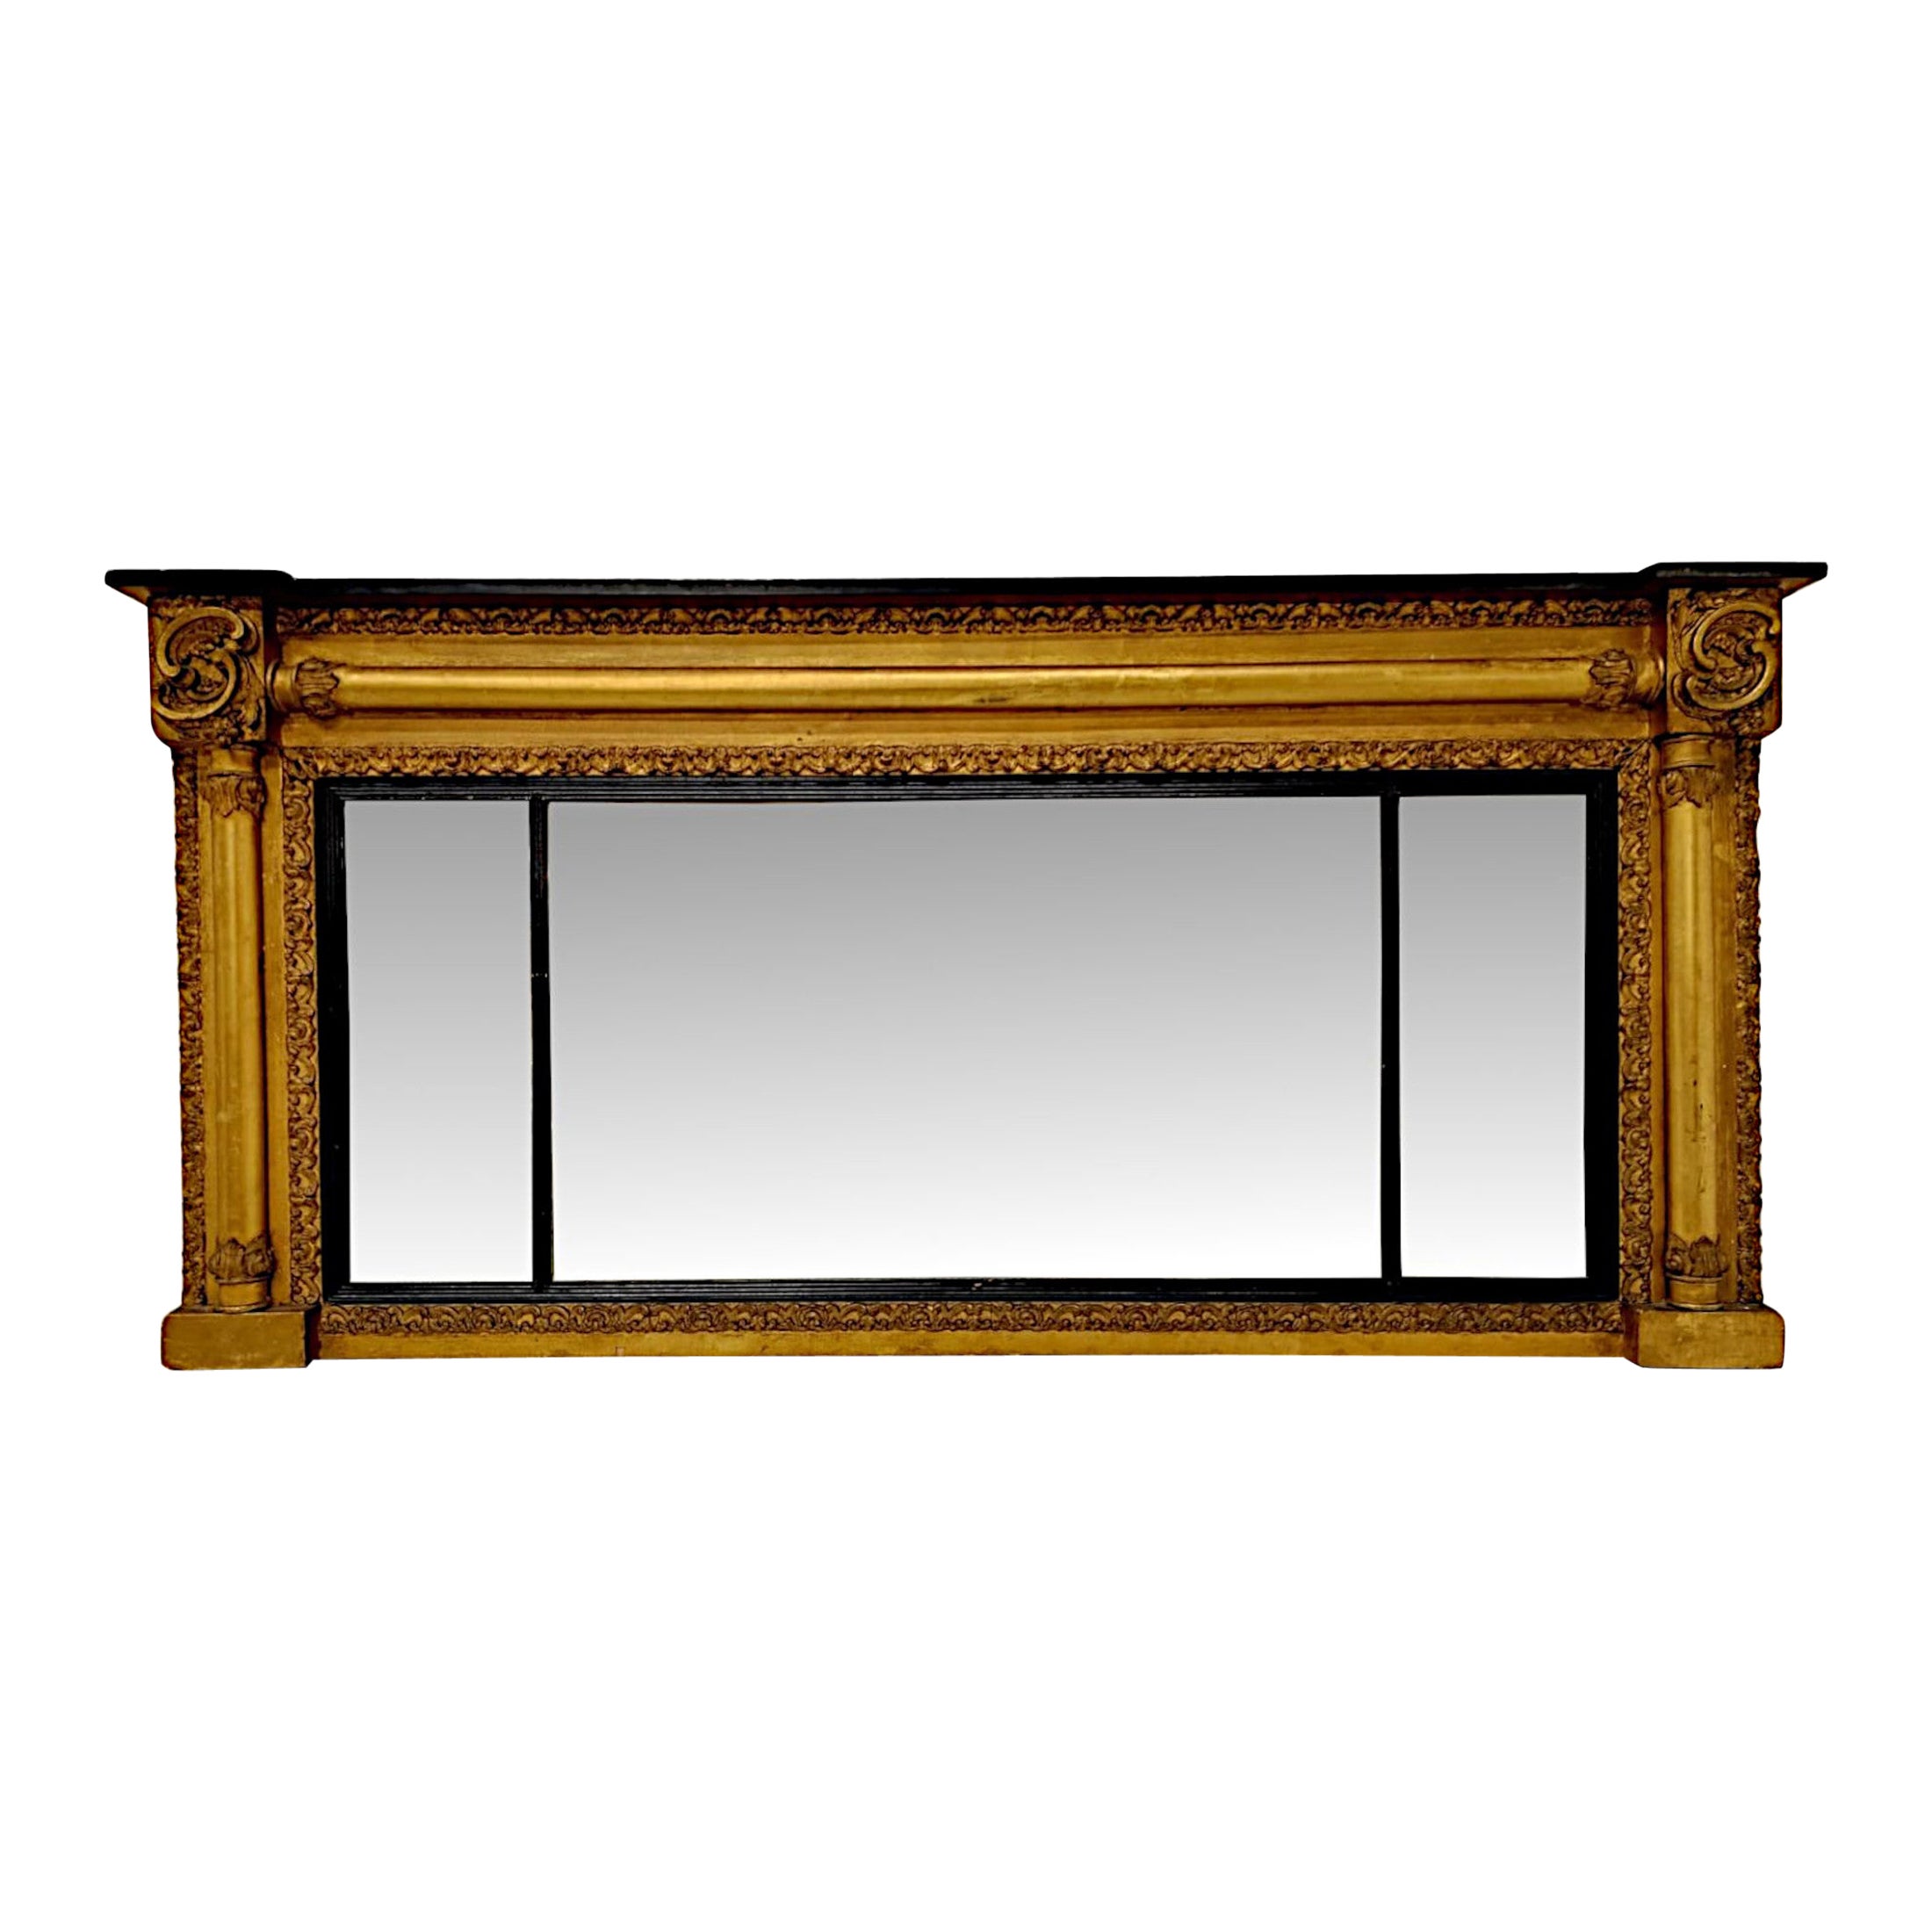 A Stunning Unusual 19th Century Giltwood Tryptch Overmantel Mirror For Sale